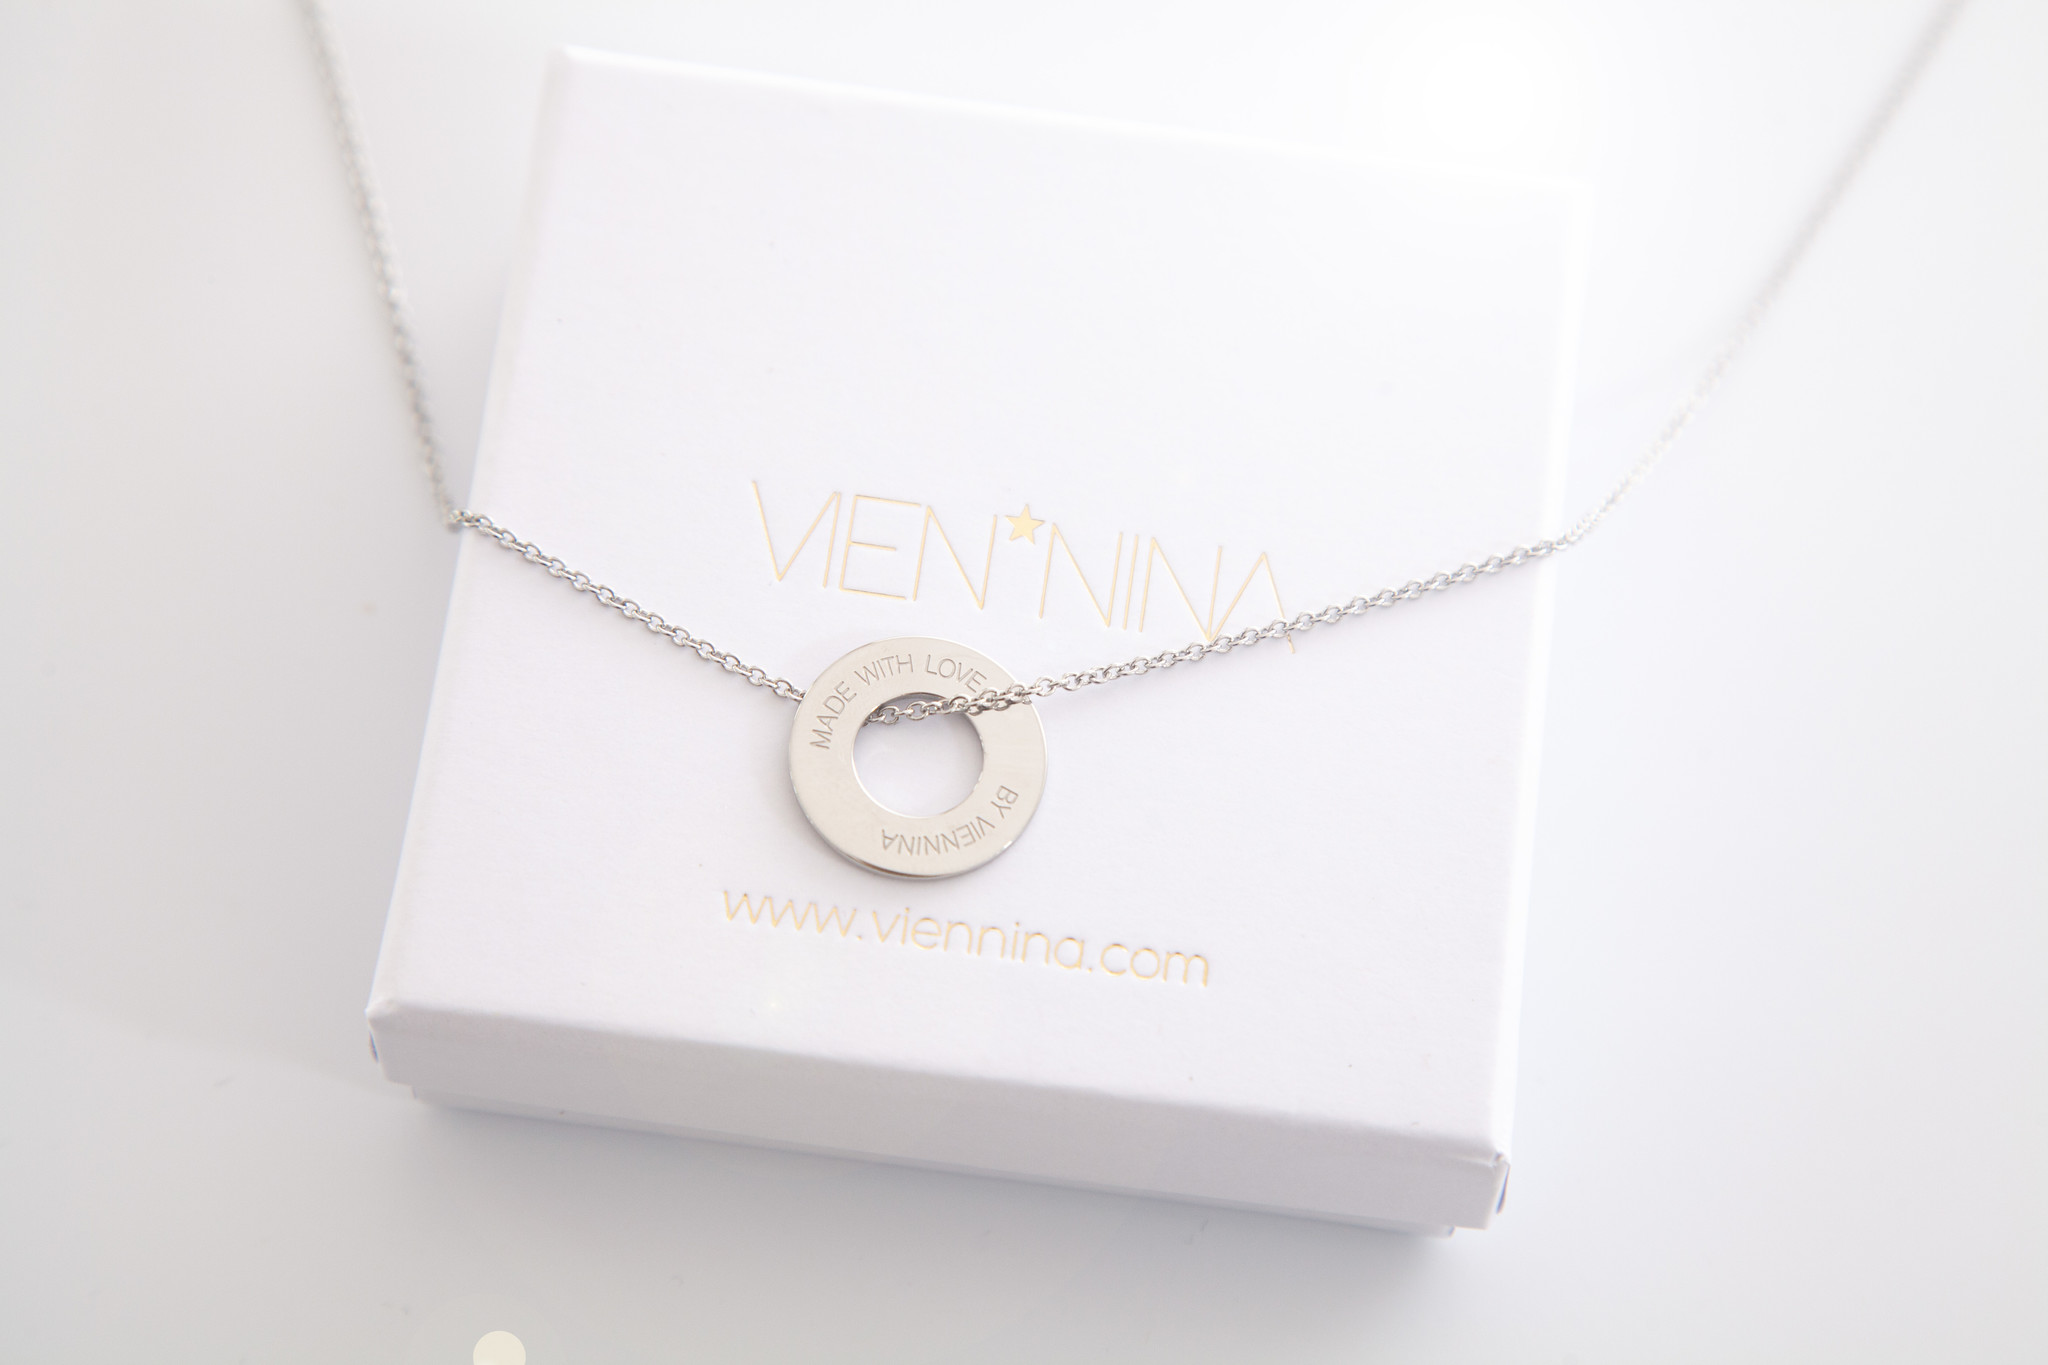 NECKLACE / large  silver glossy/ "MADE WITH LOVE BY VIENNINA" / N*FINITY